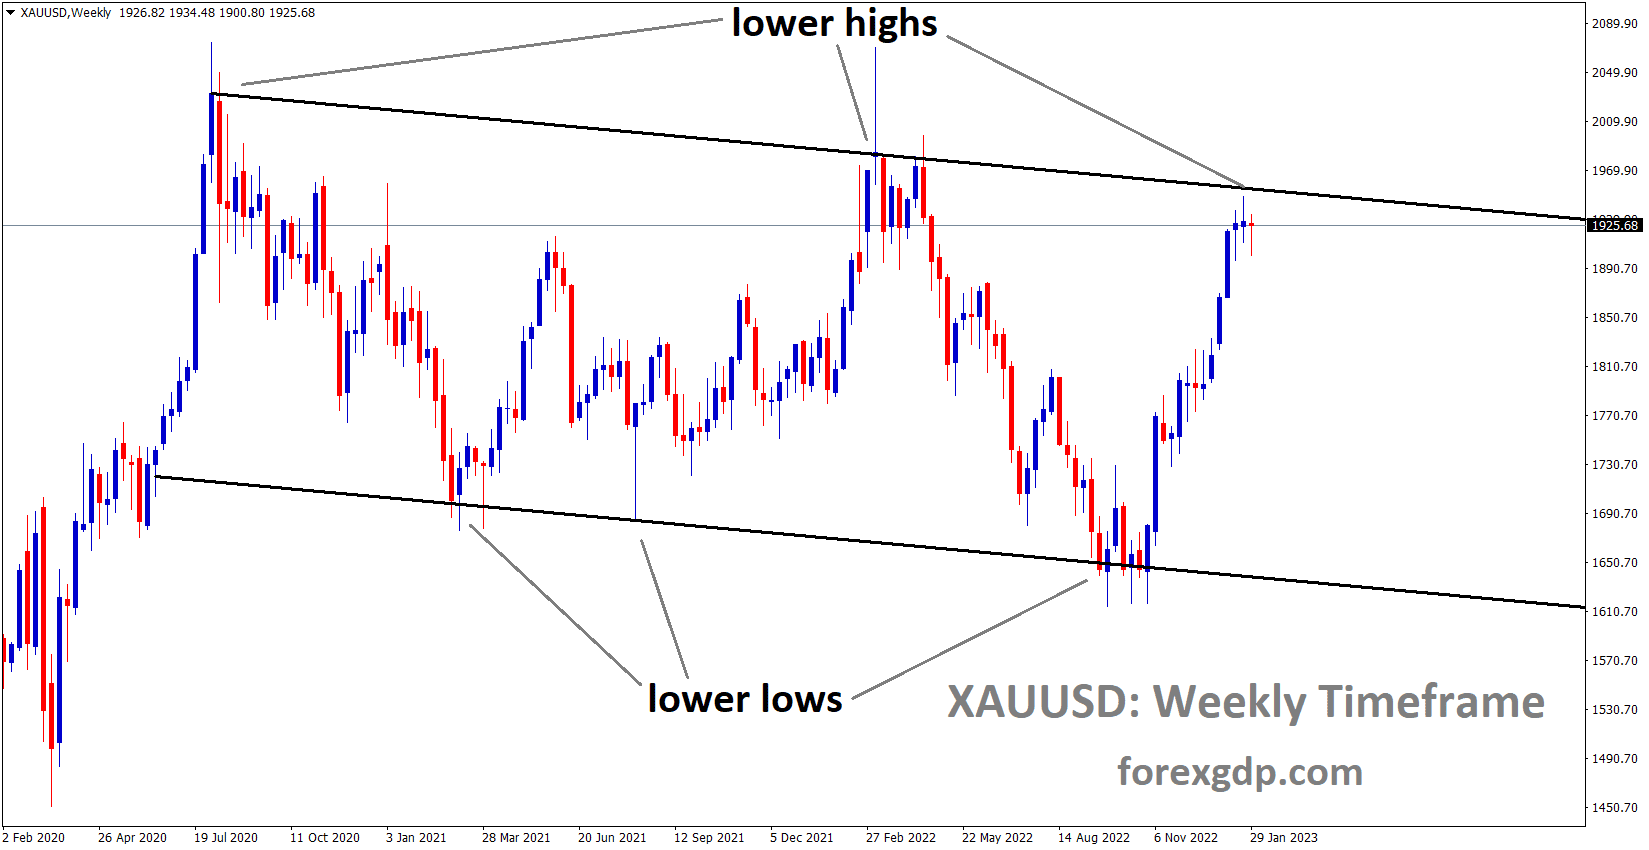 XAUUSD Weekly TF analysis Market is moving in the Descending channel and the market has reached the lower high area of the channel